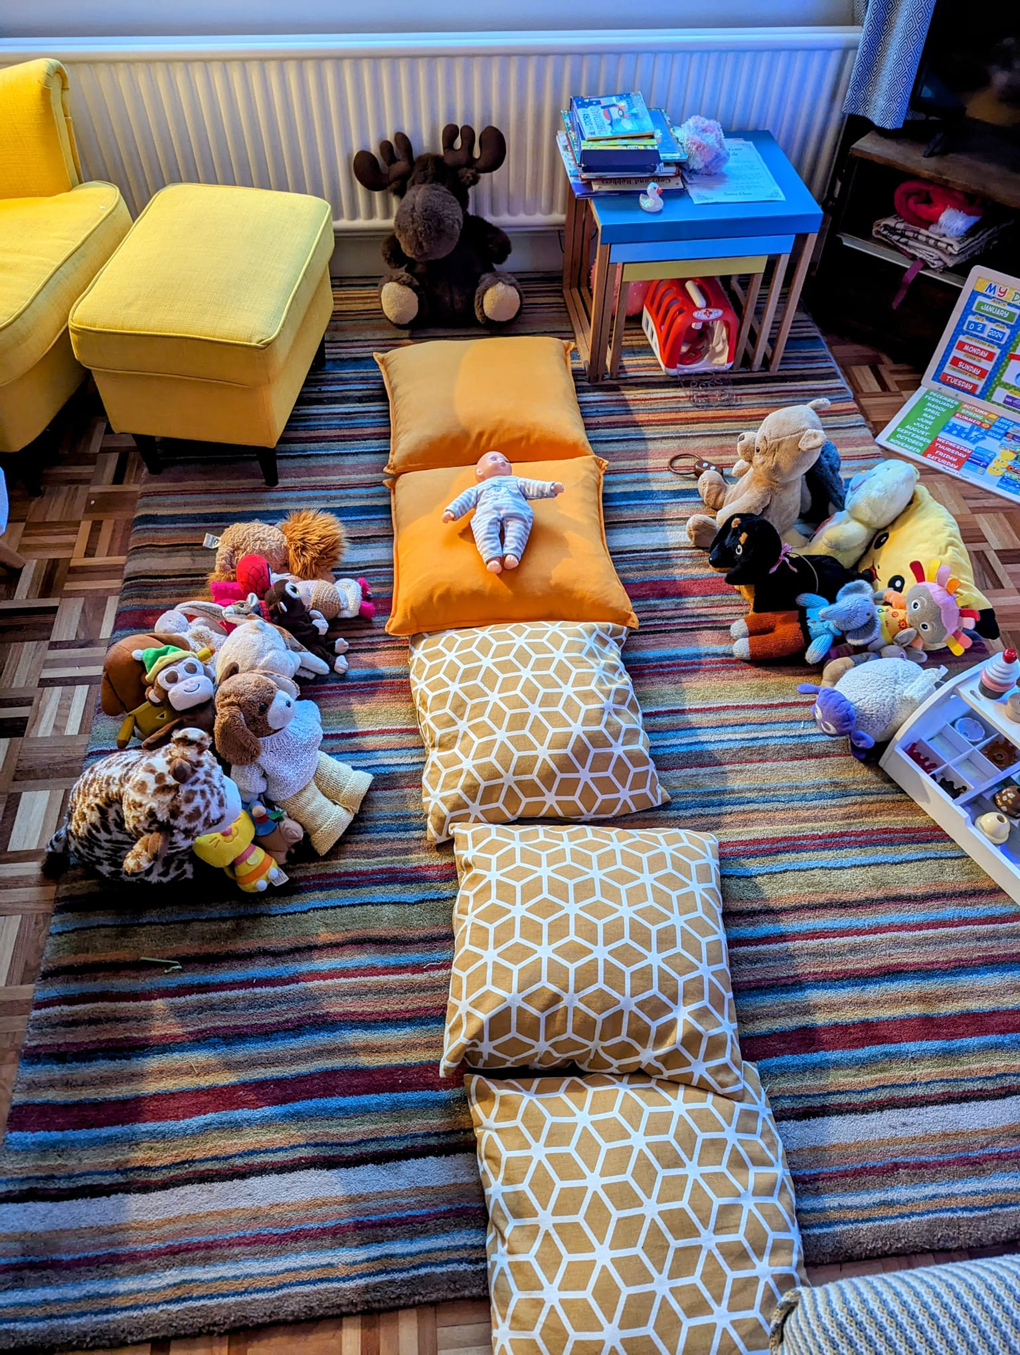 Baby doll on a cushion surrounded by other plush toys